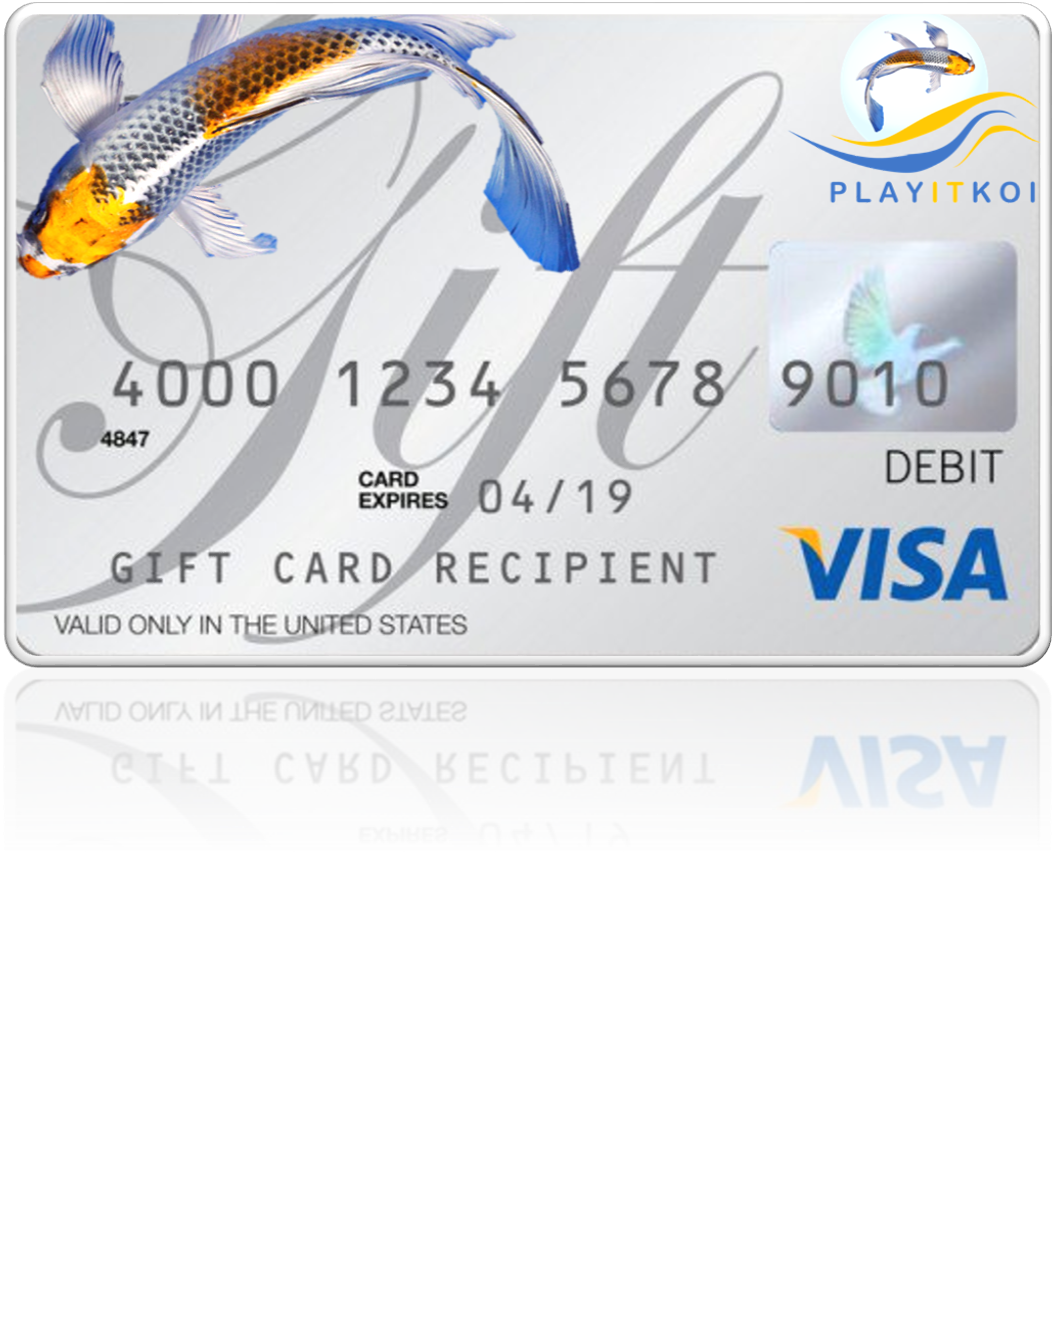 Gift Cards - Play It Koi